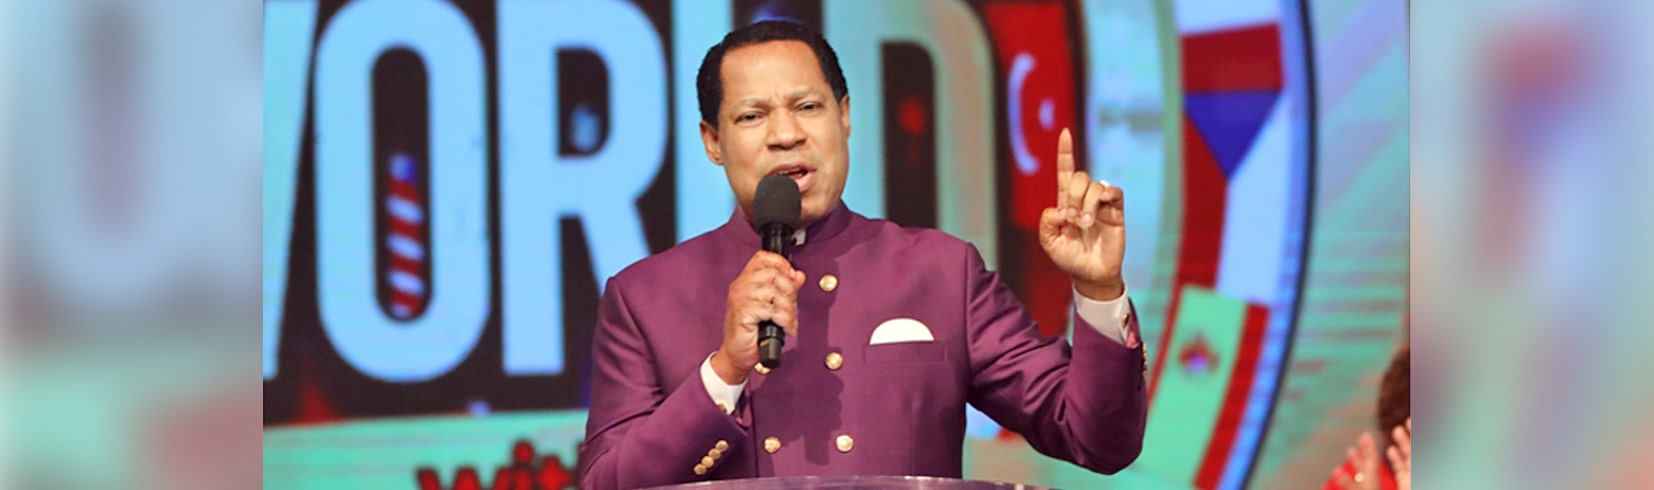 NEVER TOO LATE OR IMPOSSIBLE – PASTOR CHRIS [SUN APR 23]